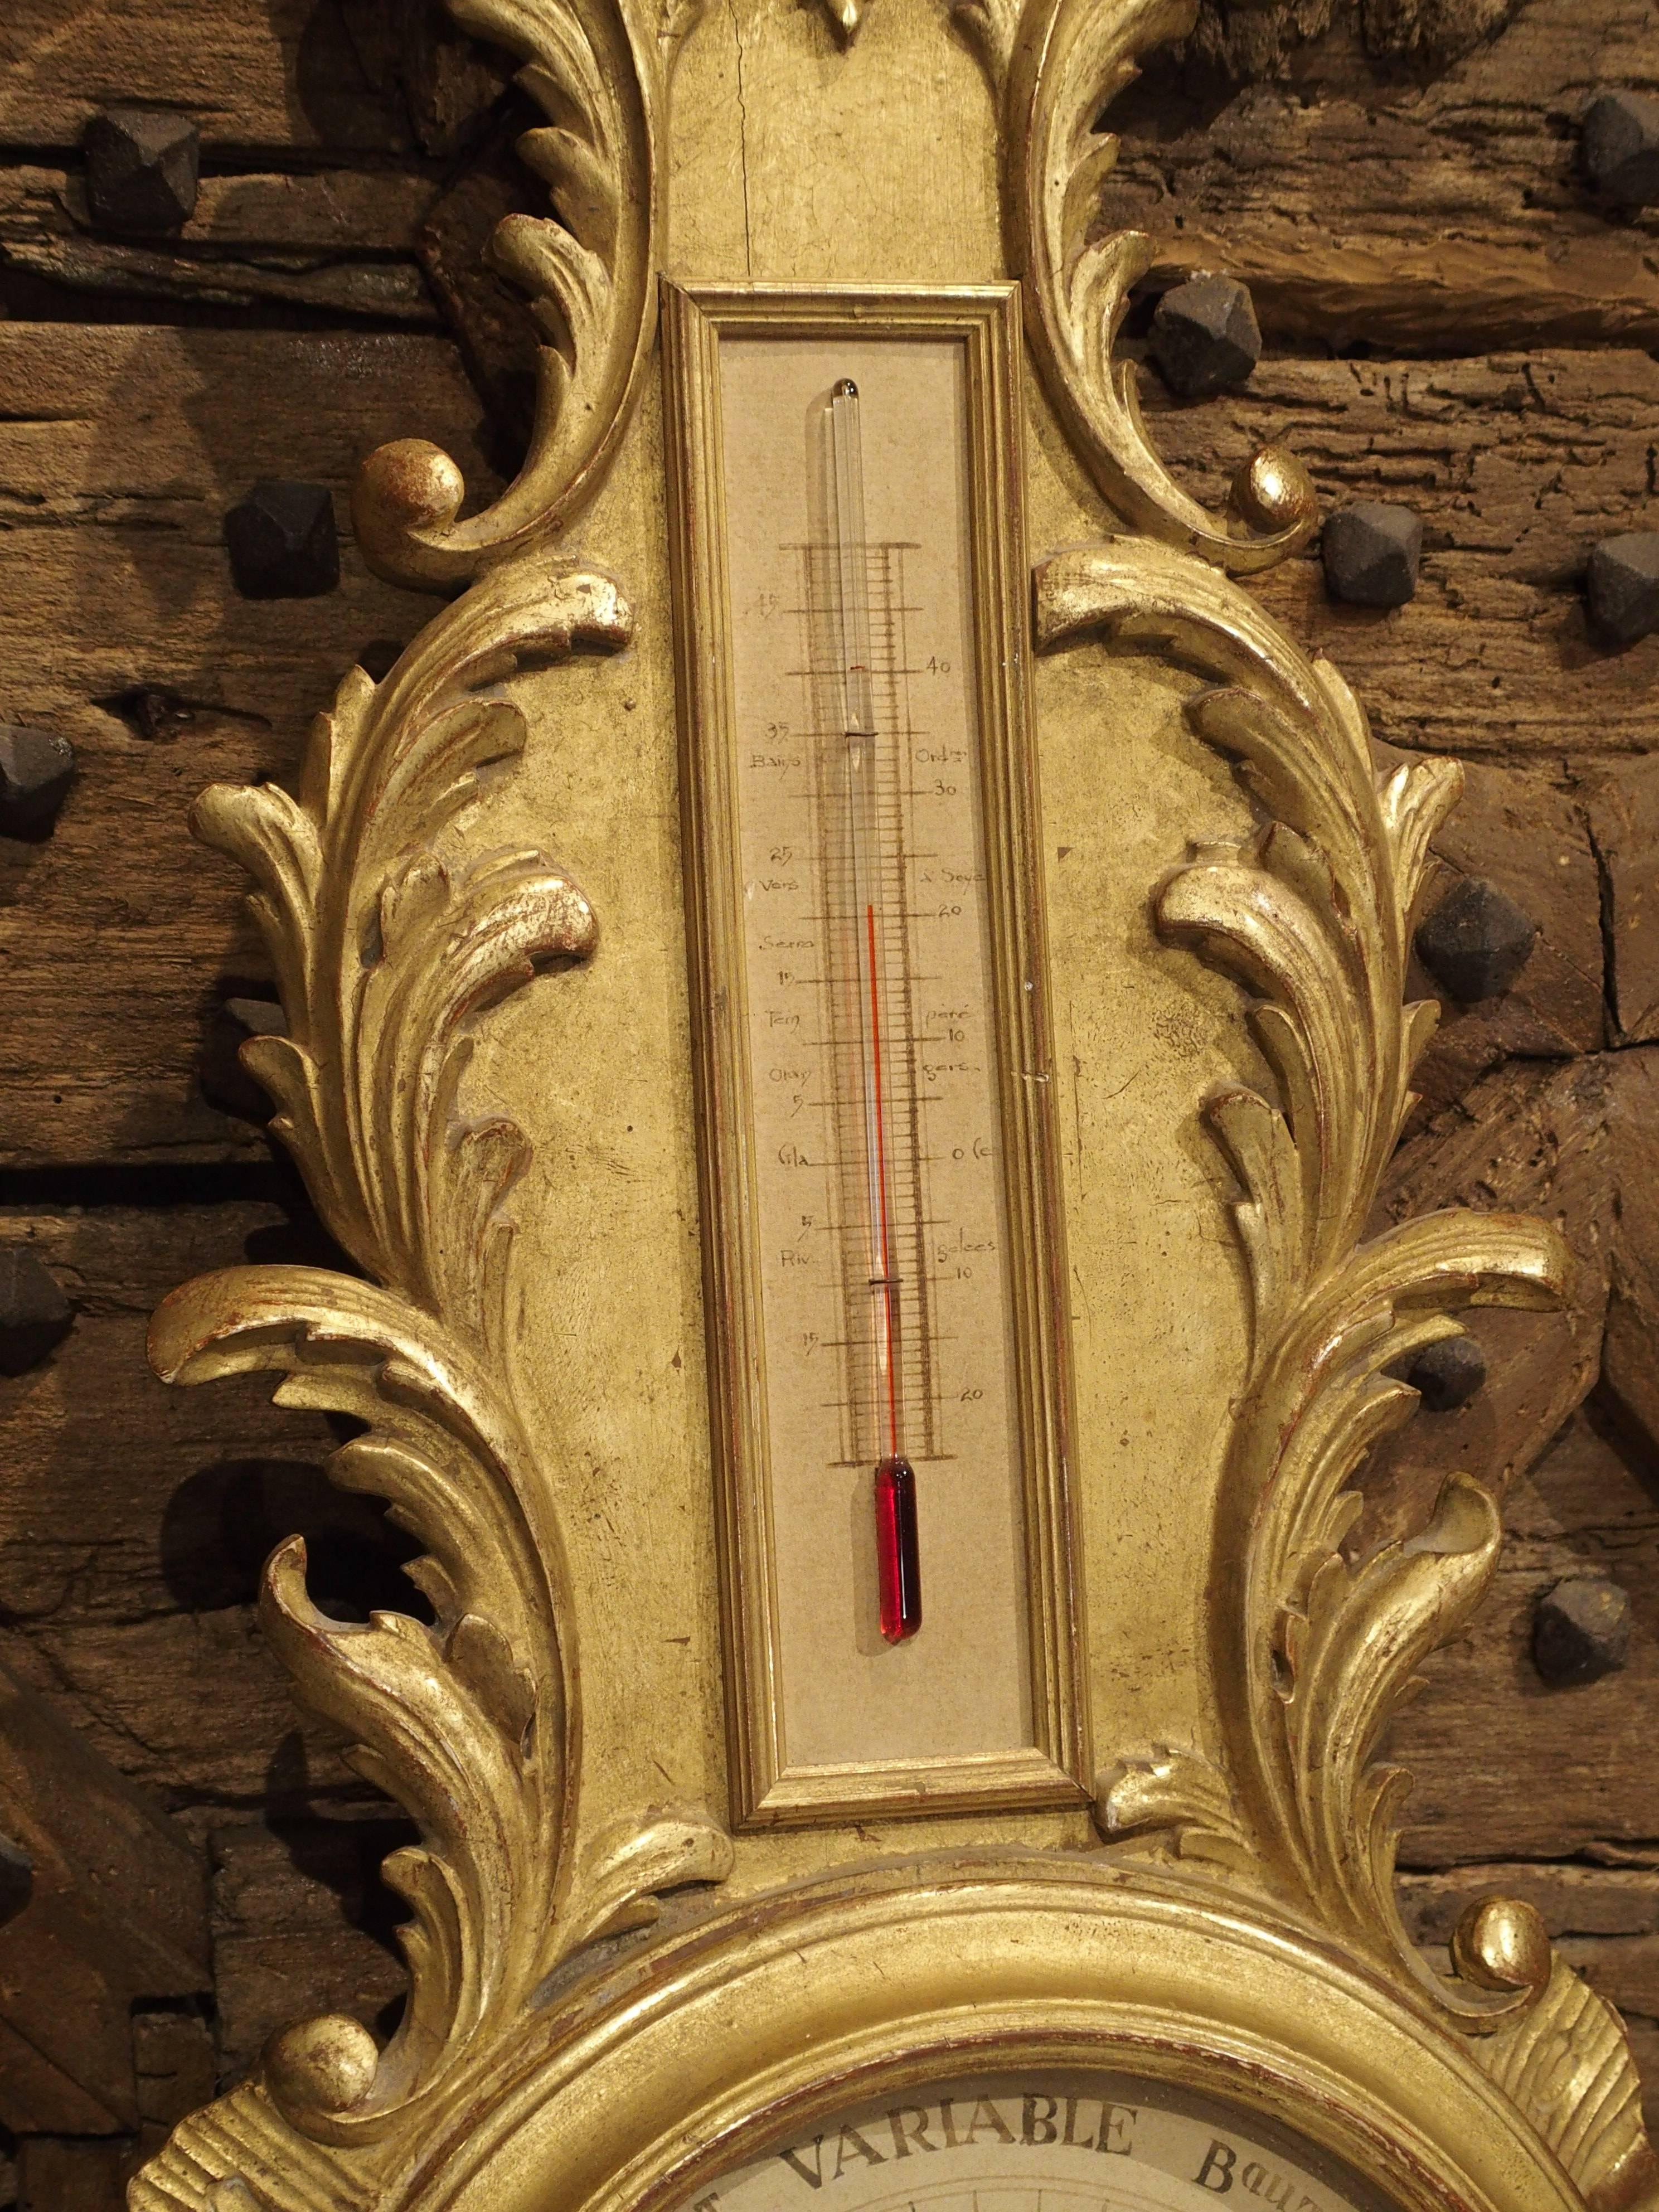 This elegant French, dual barometer or temperature has a beautiful giltwood surround with motifs in the Regence style. There are stylized shells and acanthus leaves, and the giltwood has a mixed matte and shiny finish atop red bole. There is an